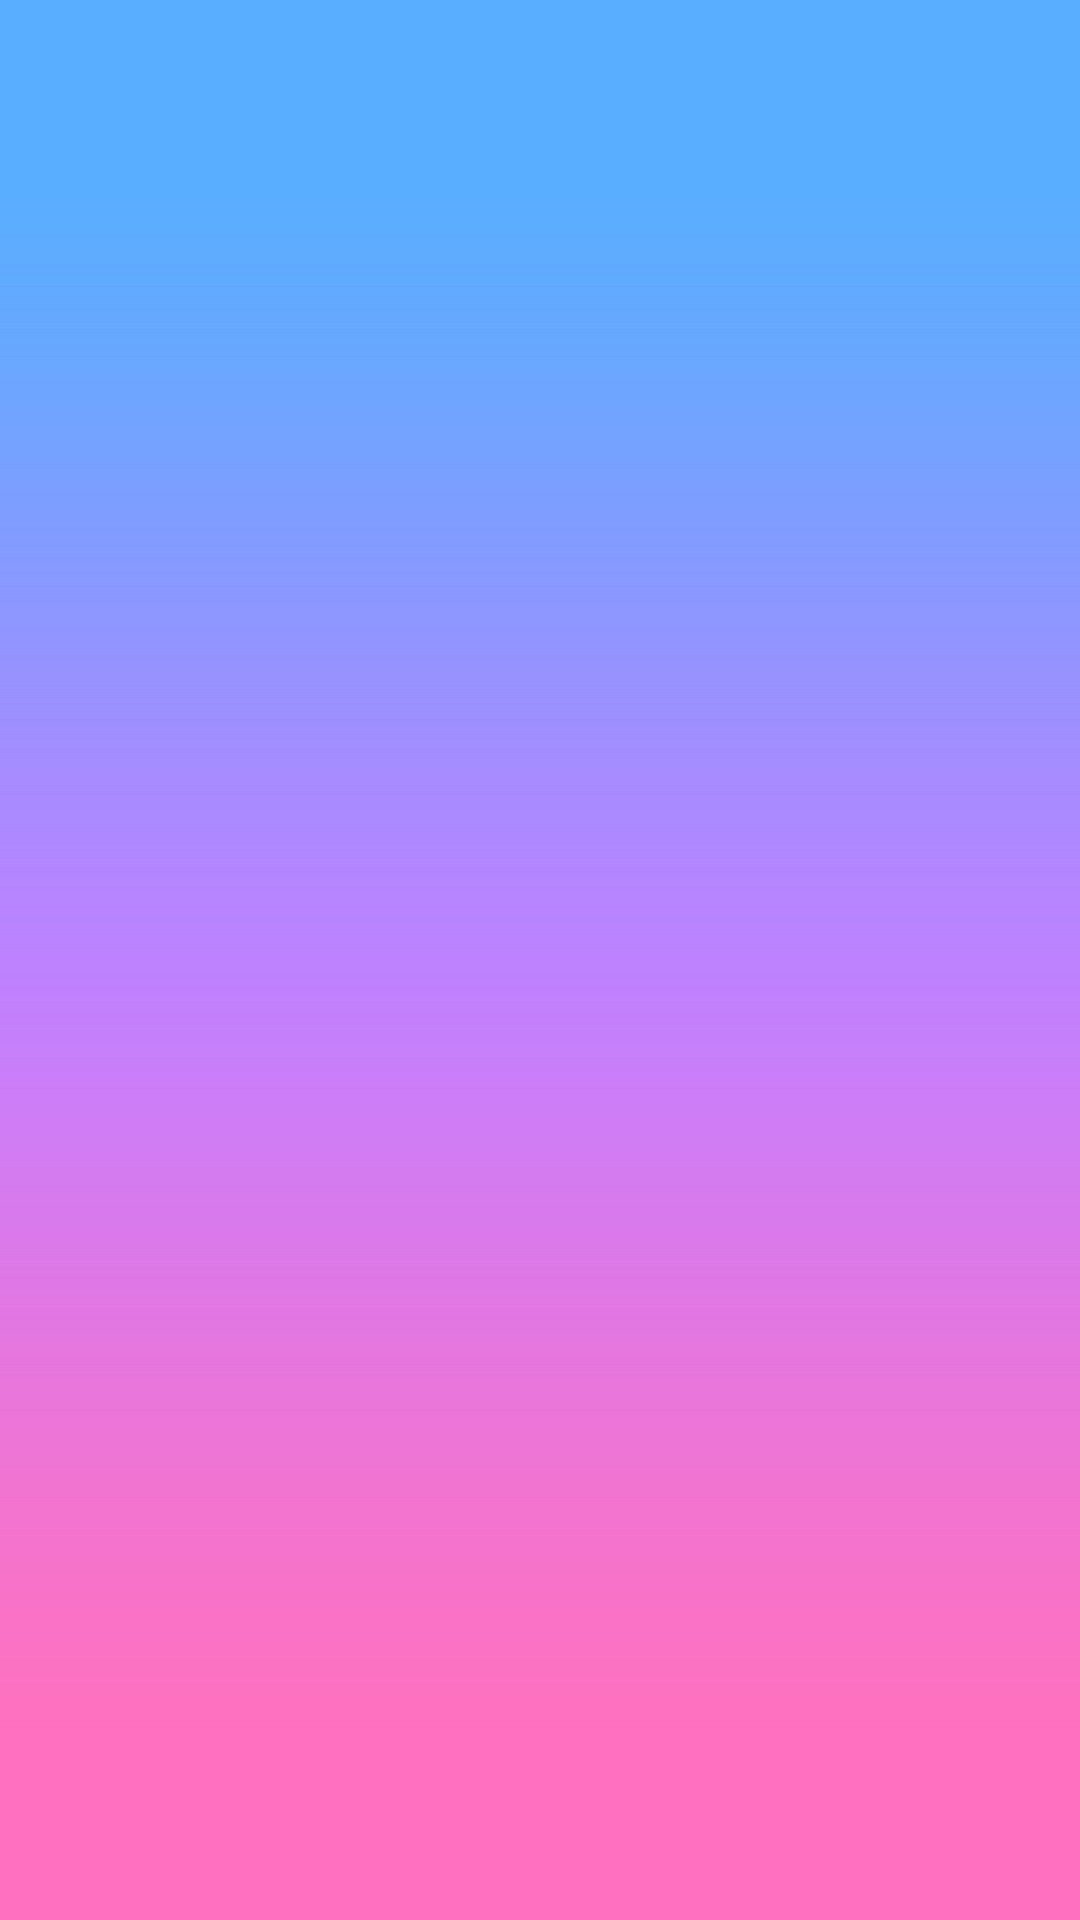 Gradient iPhone Wallpaper in HD with high-resolution 1080x1920 pixel. You can set as wallpaper for Apple iPhone X, XS Max, XR, 8, 7, 6, SE, iPad. Enjoy and share your favorite HD wallpapers and background images